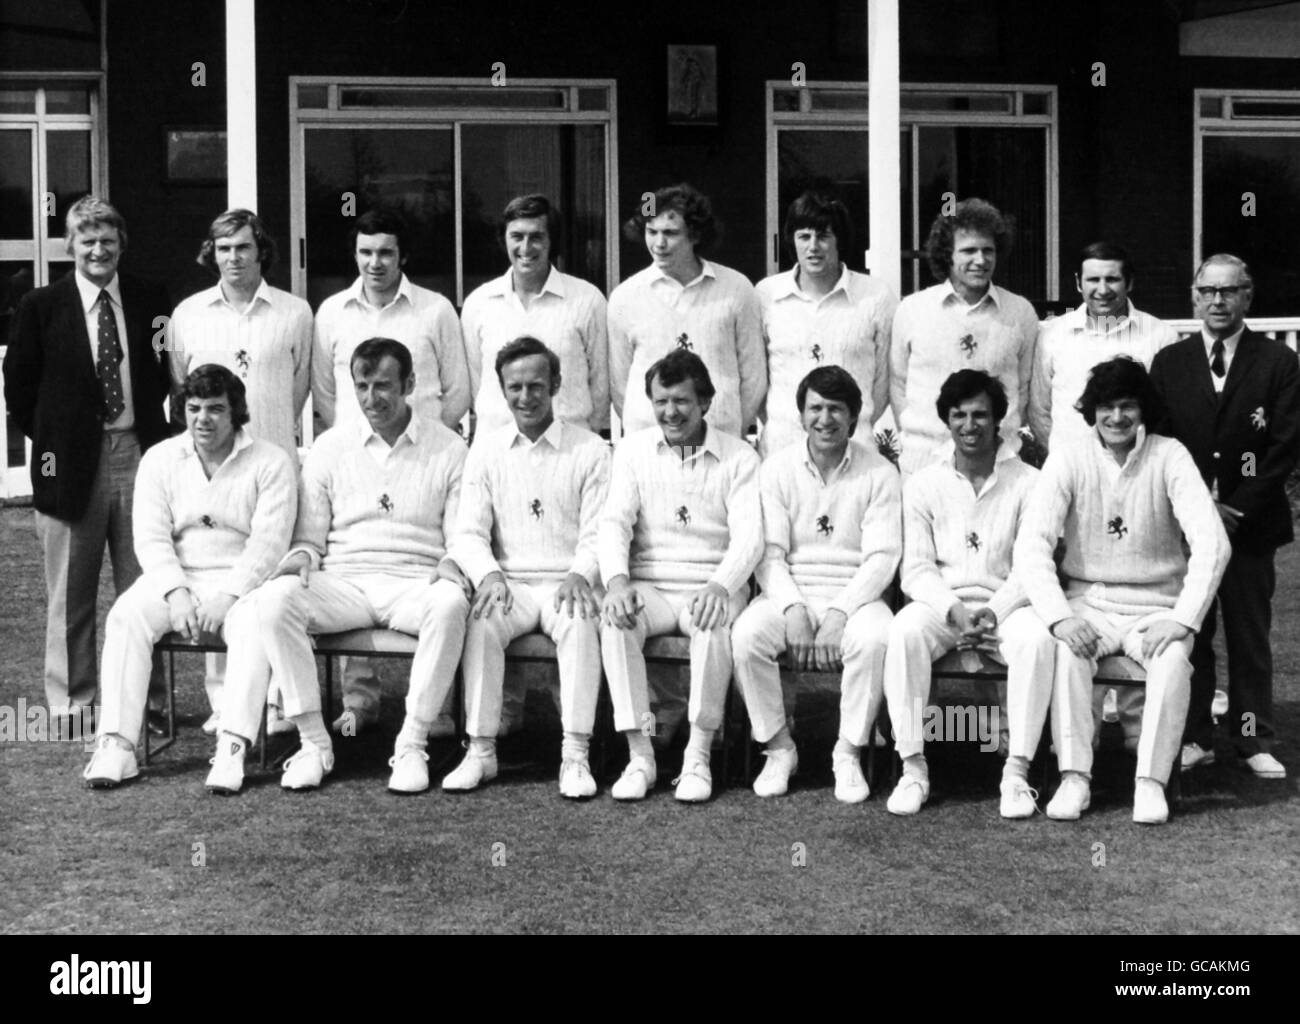 Cricket - Kent County Cricket Club - Team Group - 1976 - St Lawrence Ground, Canterbury Foto Stock